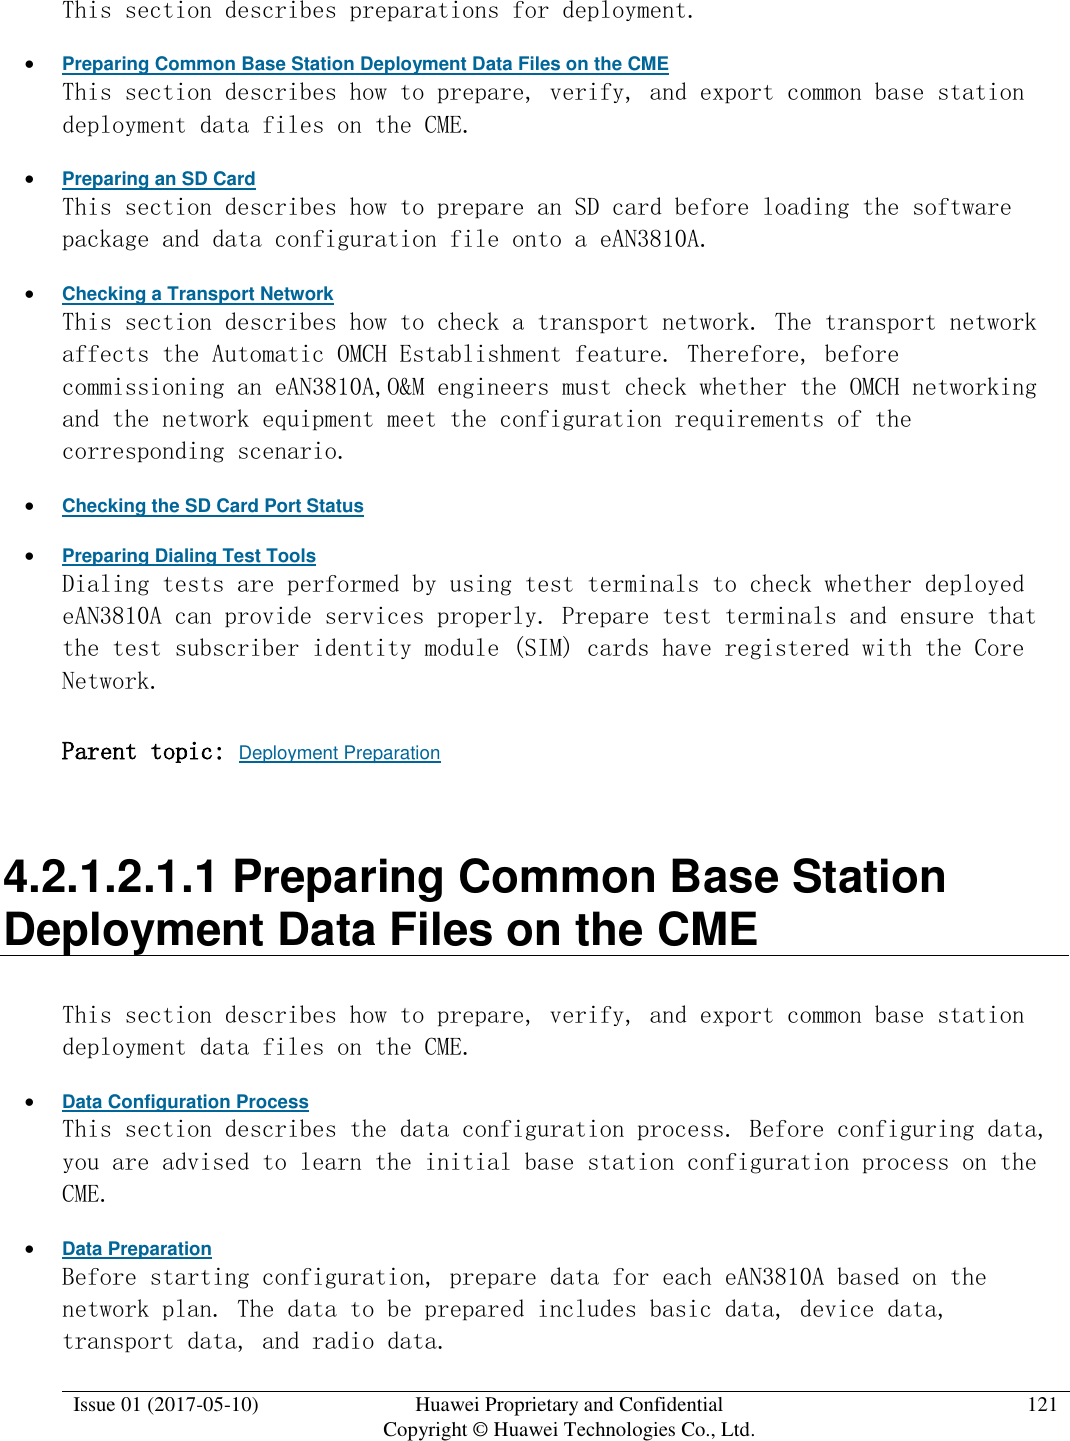  Issue 01 (2017-05-10) Huawei Proprietary and Confidential      Copyright © Huawei Technologies Co., Ltd. 121  This section describes preparations for deployment.   Preparing Common Base Station Deployment Data Files on the CME This section describes how to prepare, verify, and export common base station deployment data files on the CME.   Preparing an SD Card This section describes how to prepare an SD card before loading the software package and data configuration file onto a eAN3810A.   Checking a Transport Network This section describes how to check a transport network. The transport network affects the Automatic OMCH Establishment feature. Therefore, before commissioning an eAN3810A,O&amp;M engineers must check whether the OMCH networking and the network equipment meet the configuration requirements of the corresponding scenario.   Checking the SD Card Port Status  Preparing Dialing Test Tools Dialing tests are performed by using test terminals to check whether deployed eAN3810A can provide services properly. Prepare test terminals and ensure that the test subscriber identity module (SIM) cards have registered with the Core Network. Parent topic: Deployment Preparation 4.2.1.2.1.1 Preparing Common Base Station Deployment Data Files on the CME This section describes how to prepare, verify, and export common base station deployment data files on the CME.   Data Configuration Process This section describes the data configuration process. Before configuring data, you are advised to learn the initial base station configuration process on the CME.  Data Preparation Before starting configuration, prepare data for each eAN3810A based on the network plan. The data to be prepared includes basic data, device data, transport data, and radio data.  